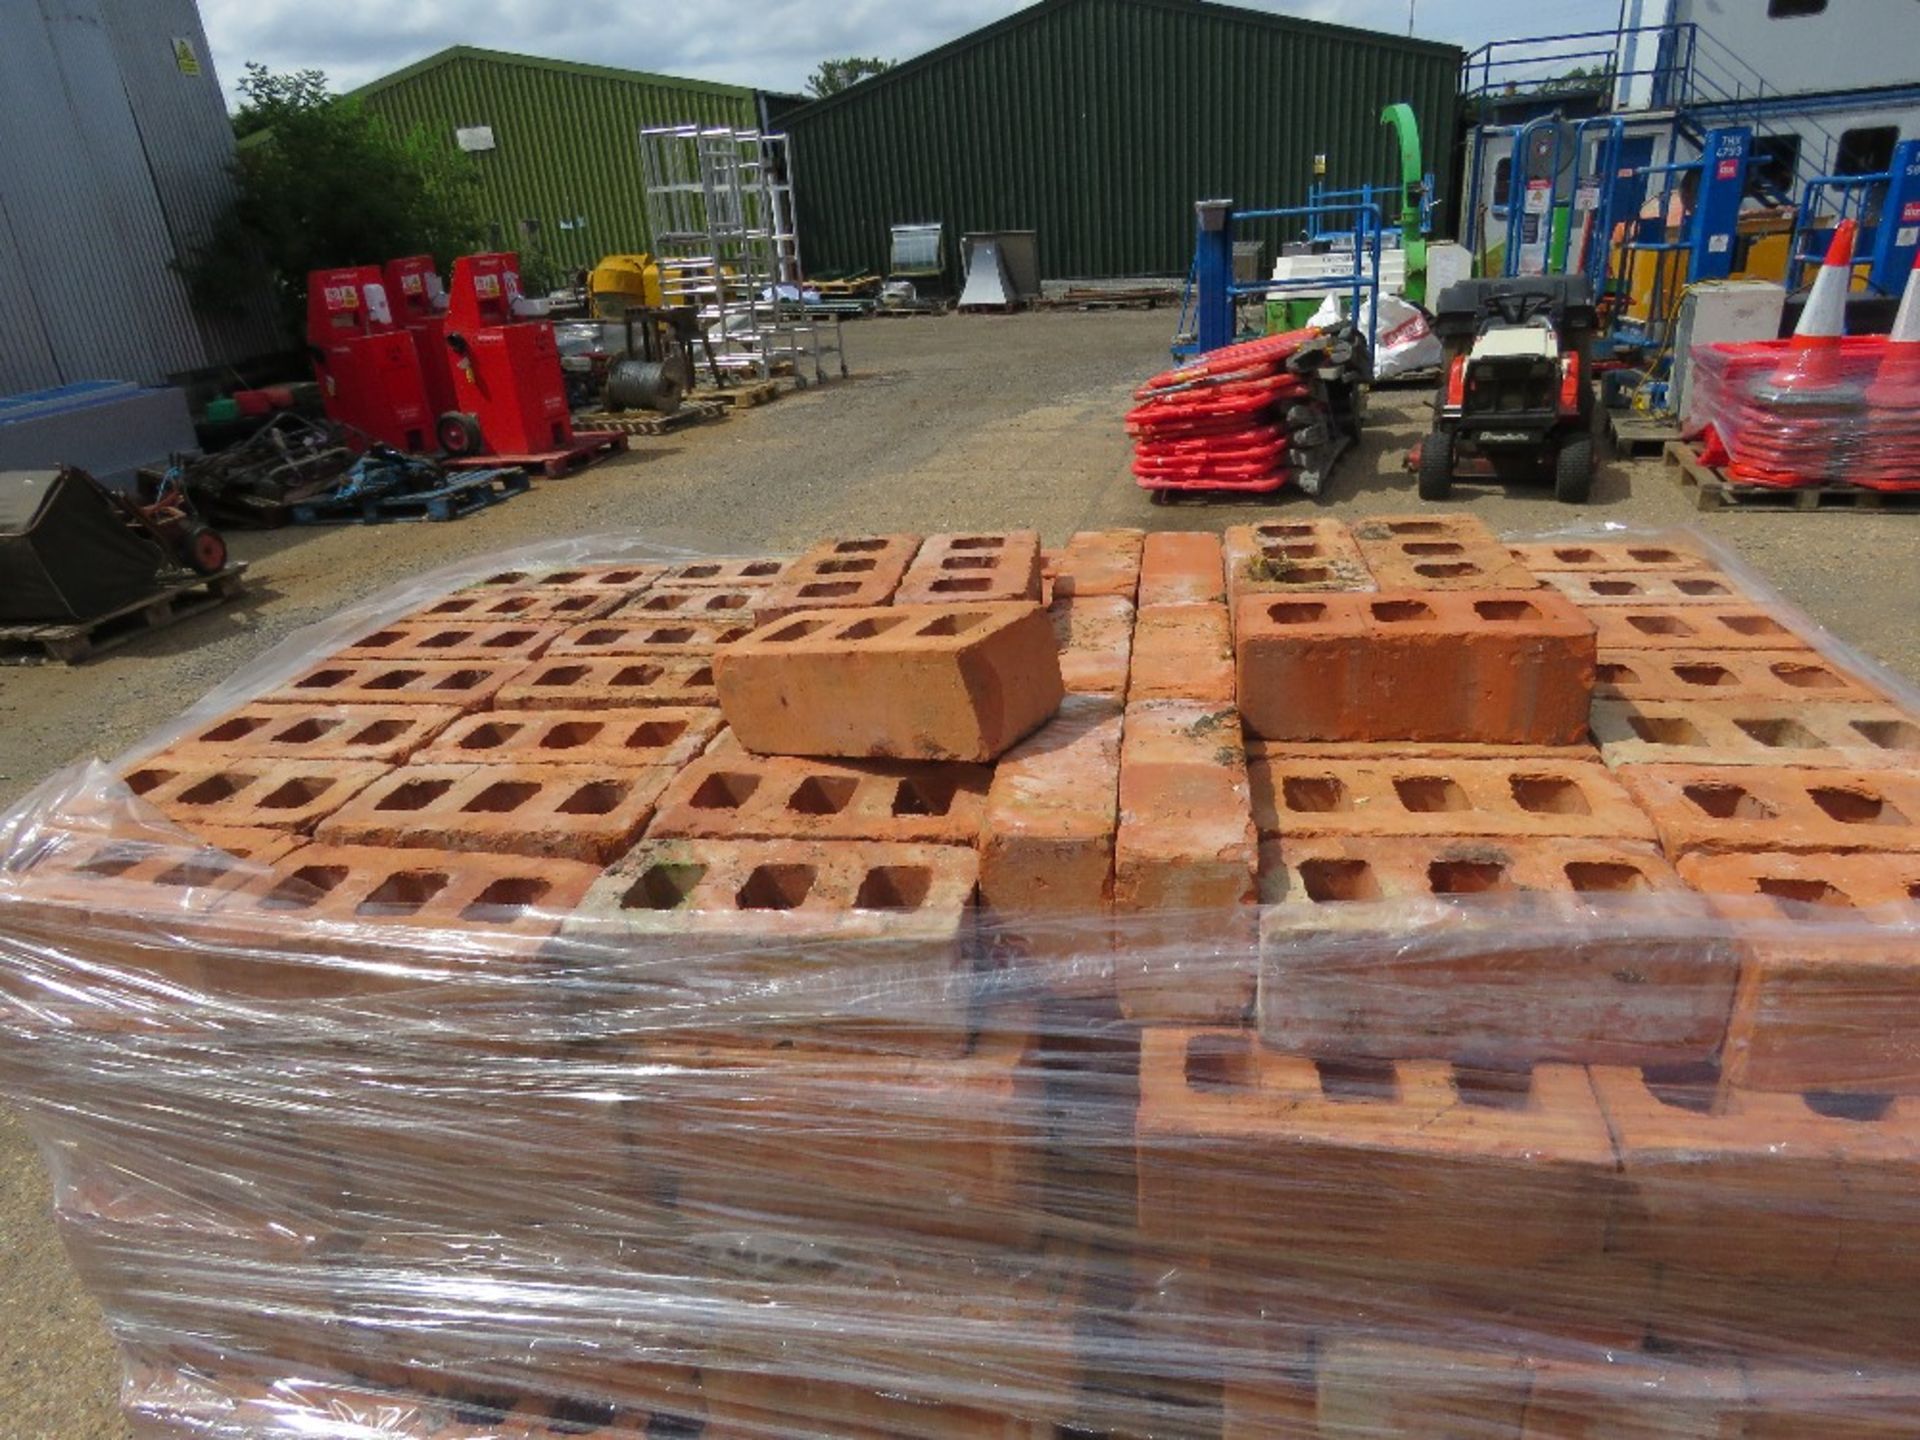 2 X PALLET OF RED BRICKS 215 X 70 X 100 APPROX. - Image 3 of 8